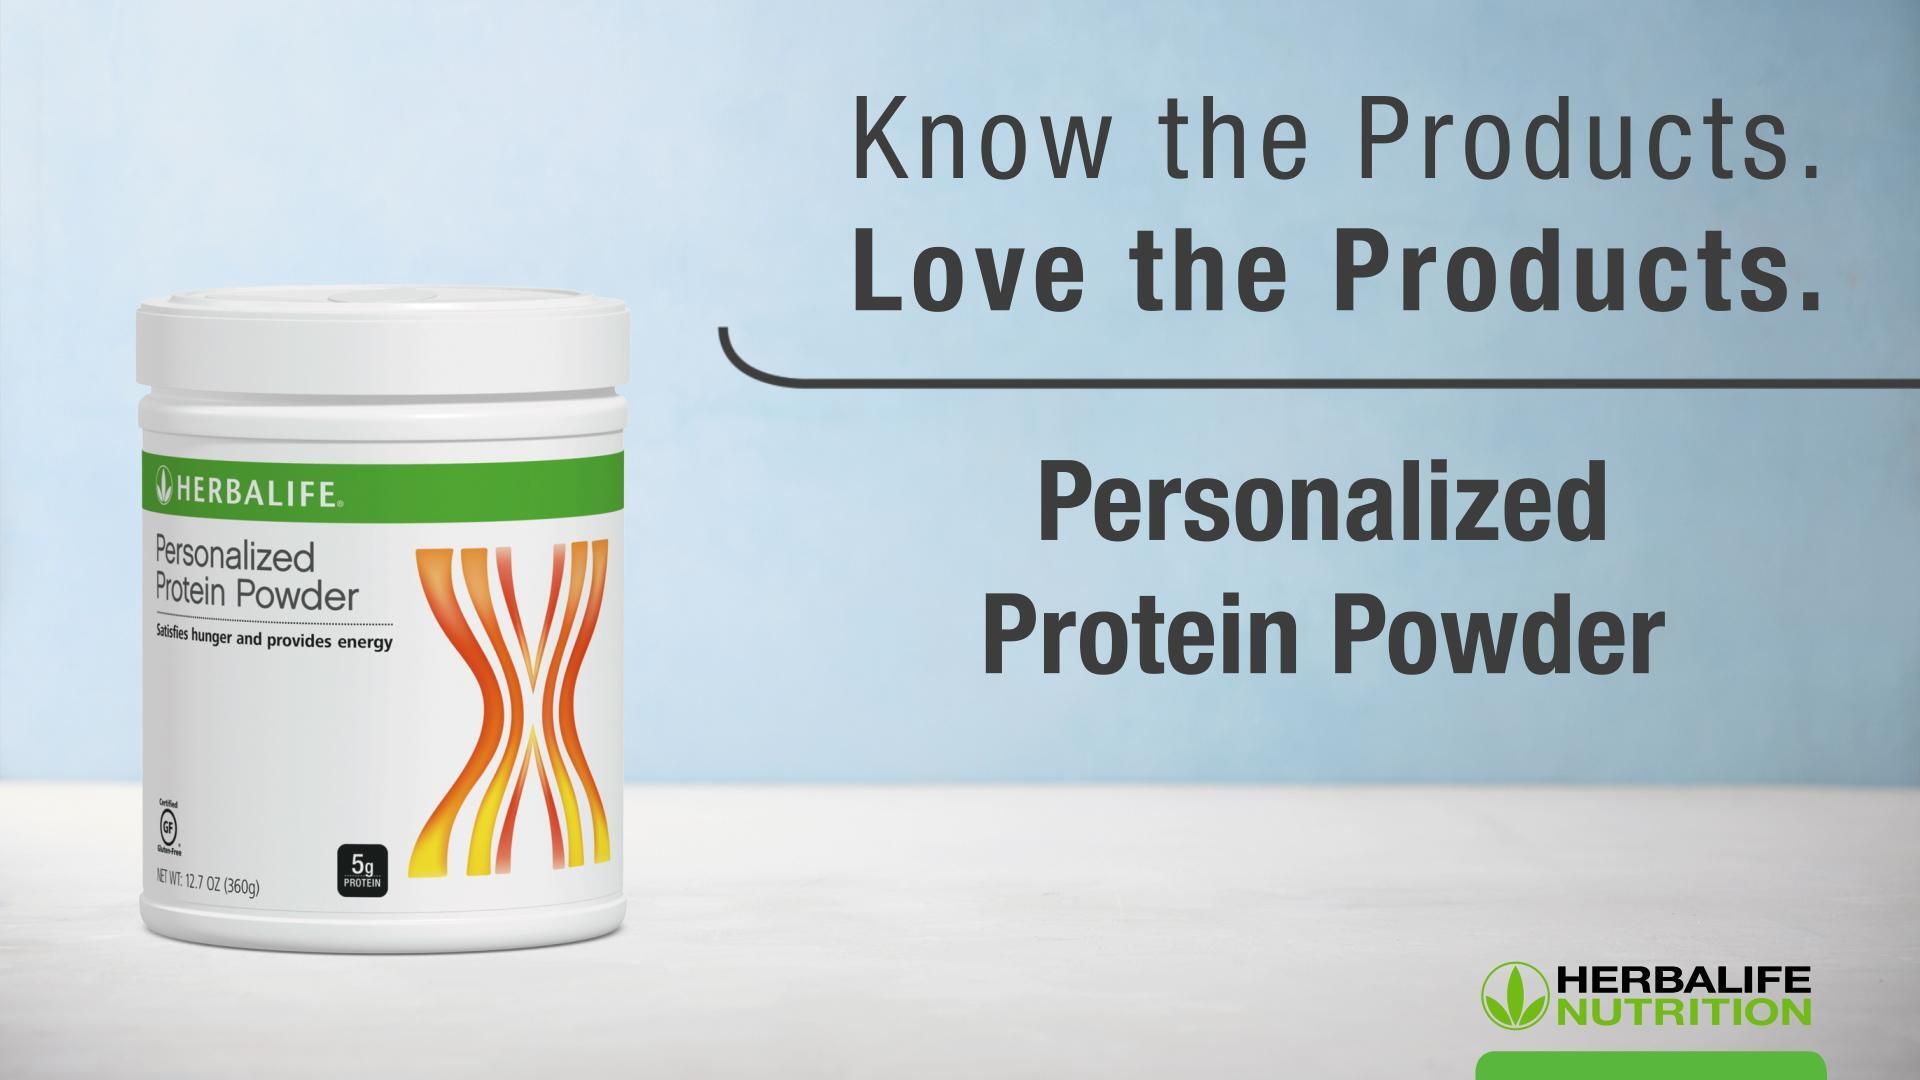 Personalized Protein Powder: Know the Products